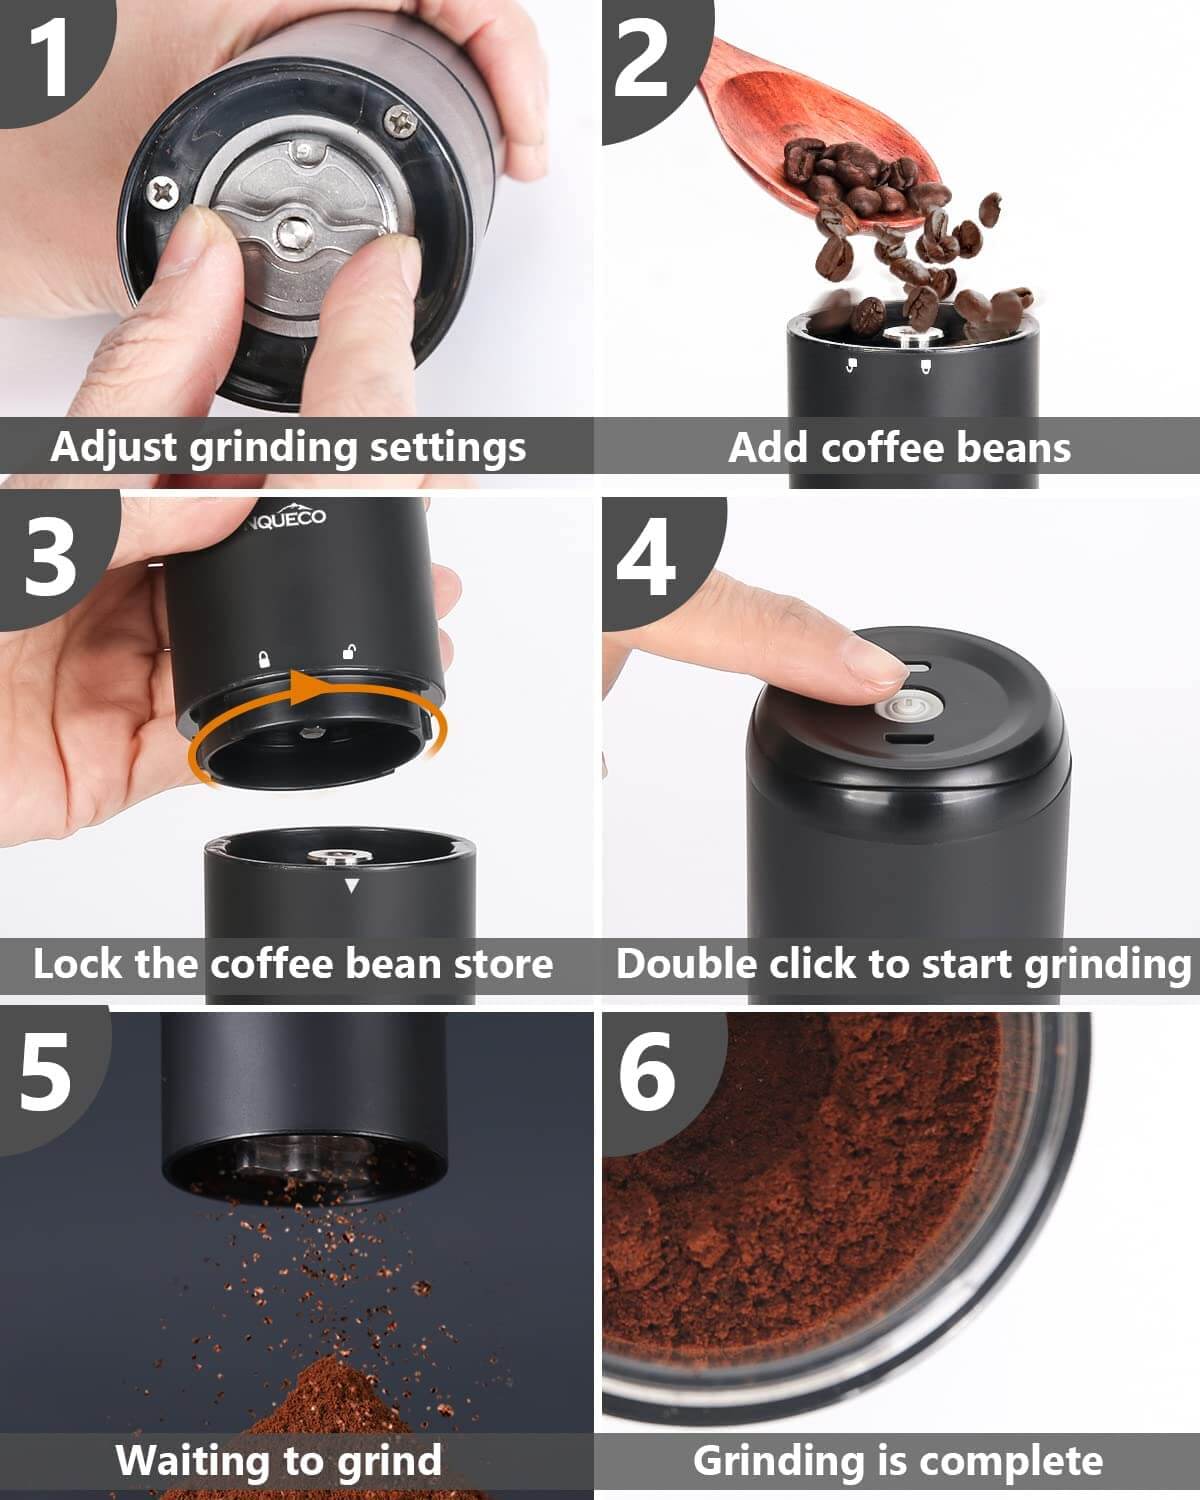 Small, Electric Burr Coffee Grinder with Multiple Grind Settings